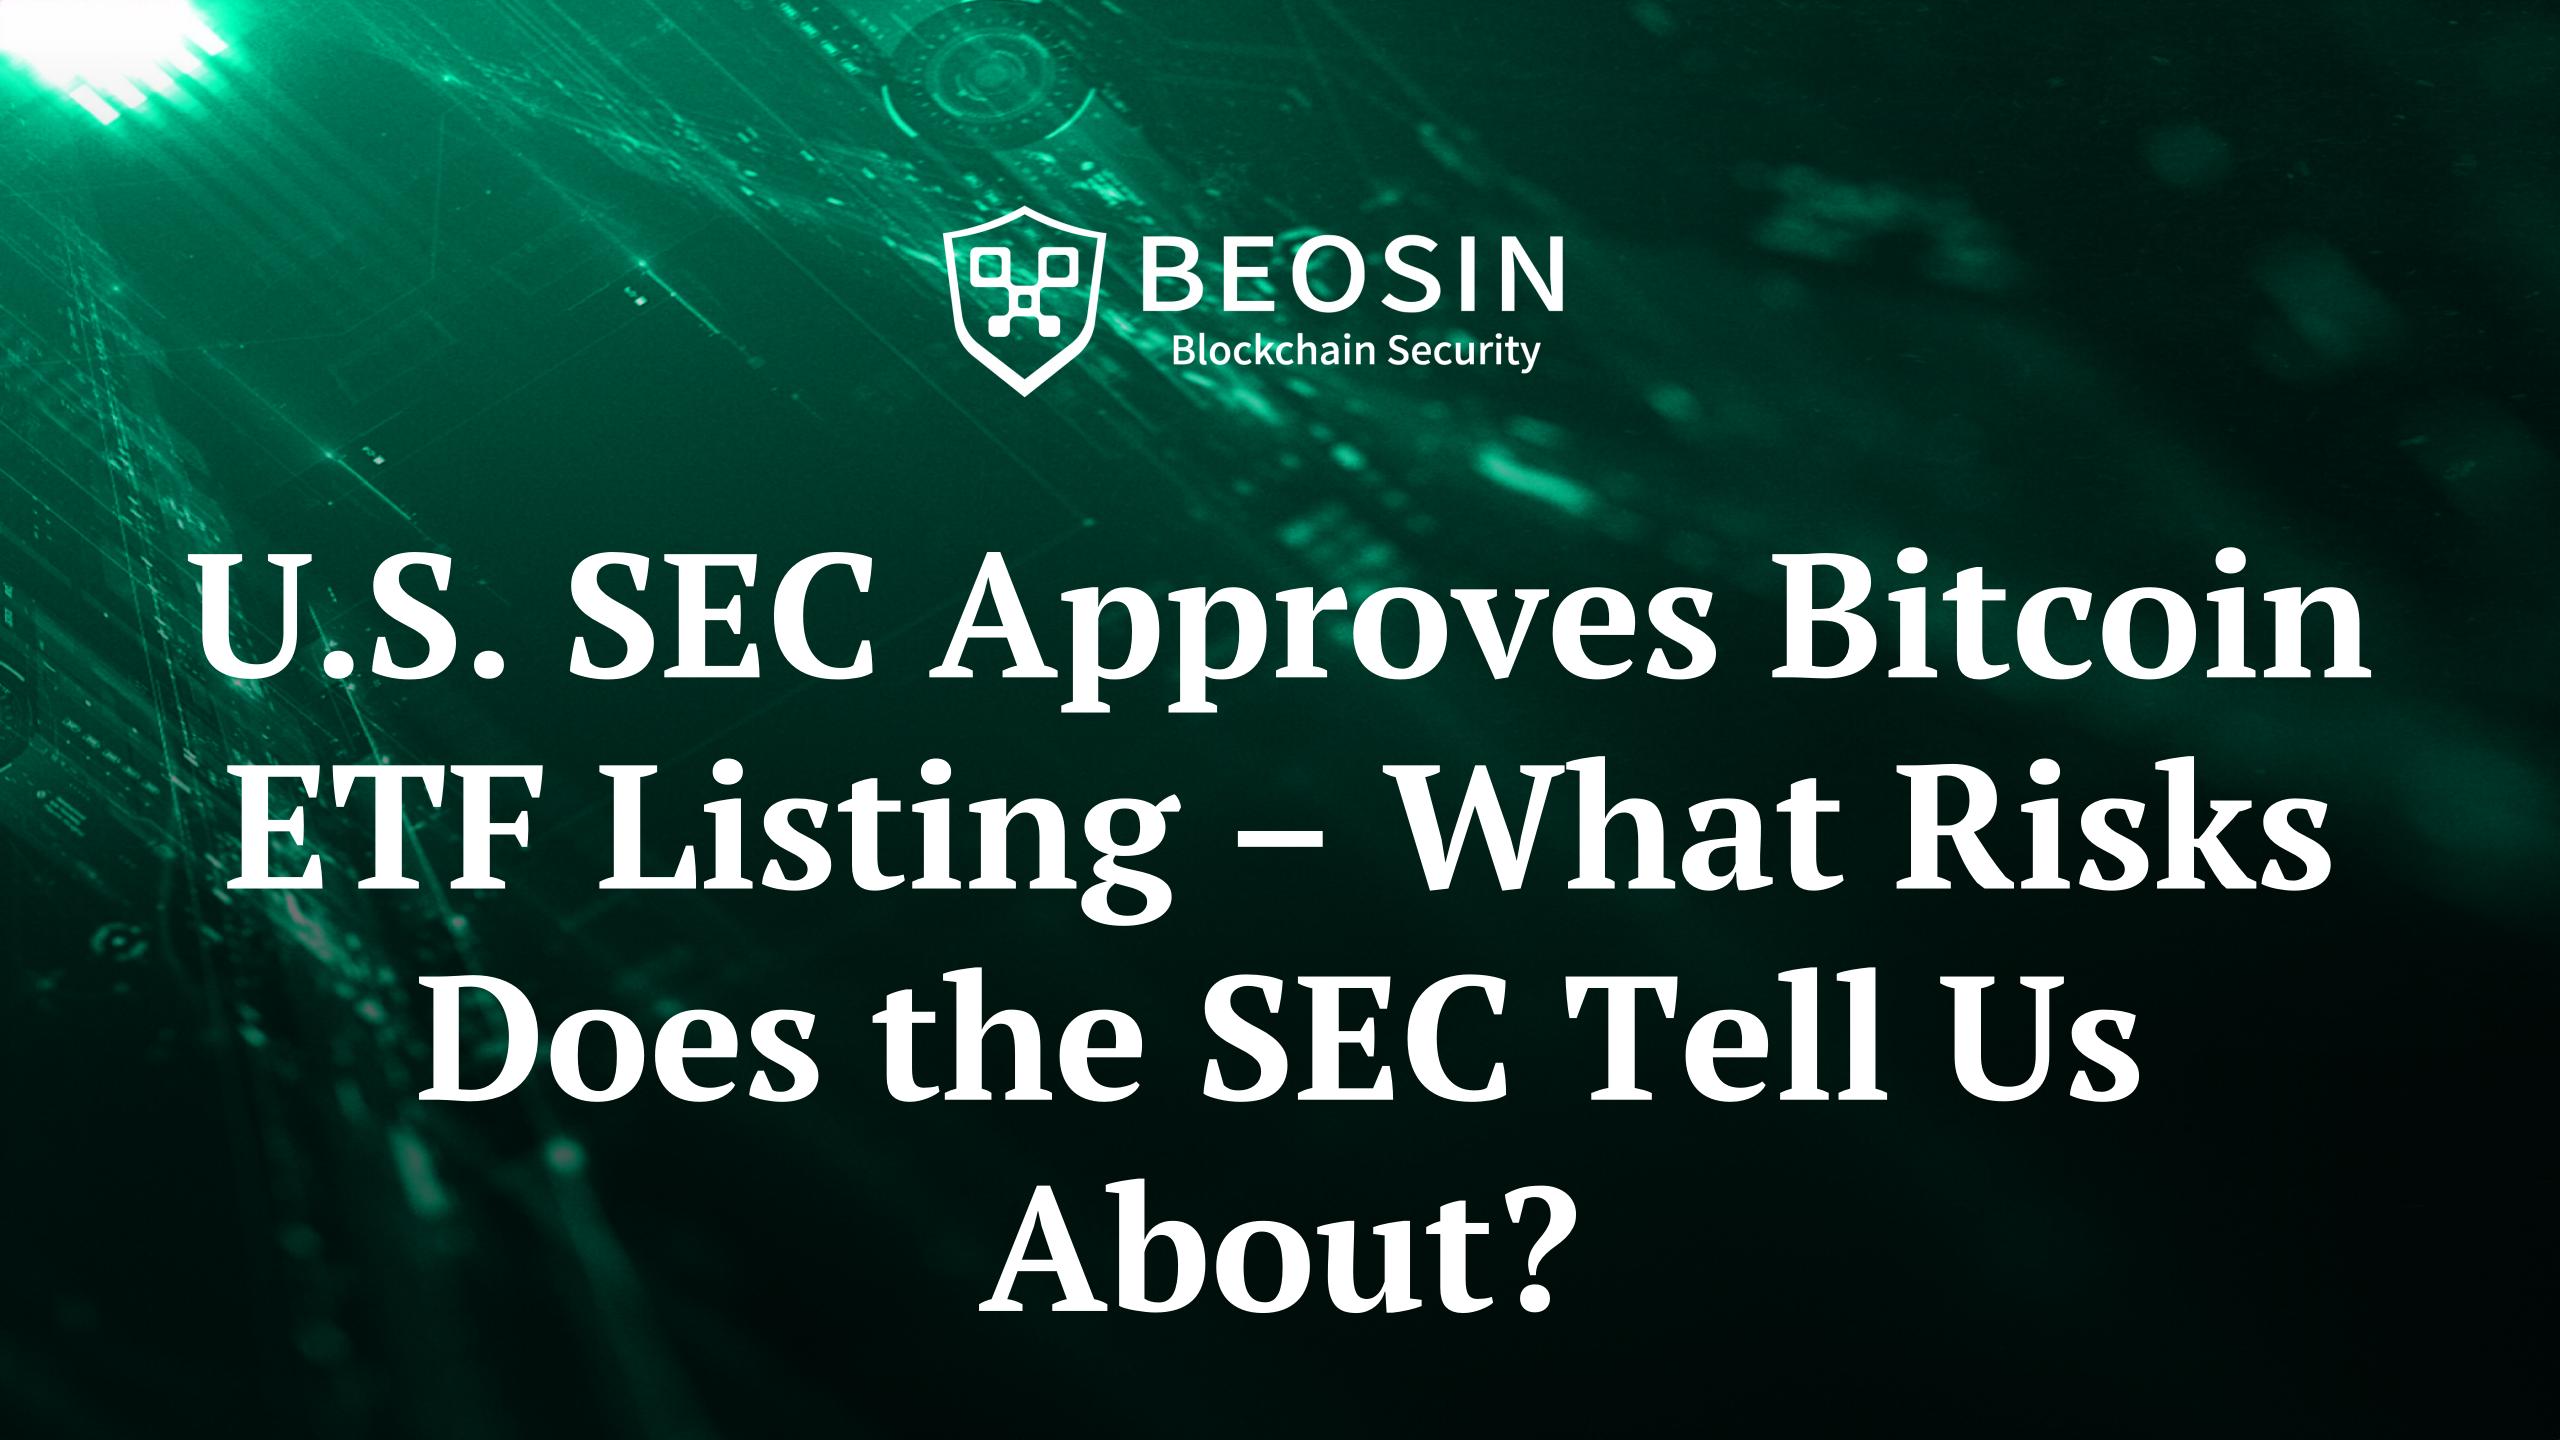 U.S. SEC Approves Bitcoin ETF Listing - What Risks Does the SEC Tell Us About?